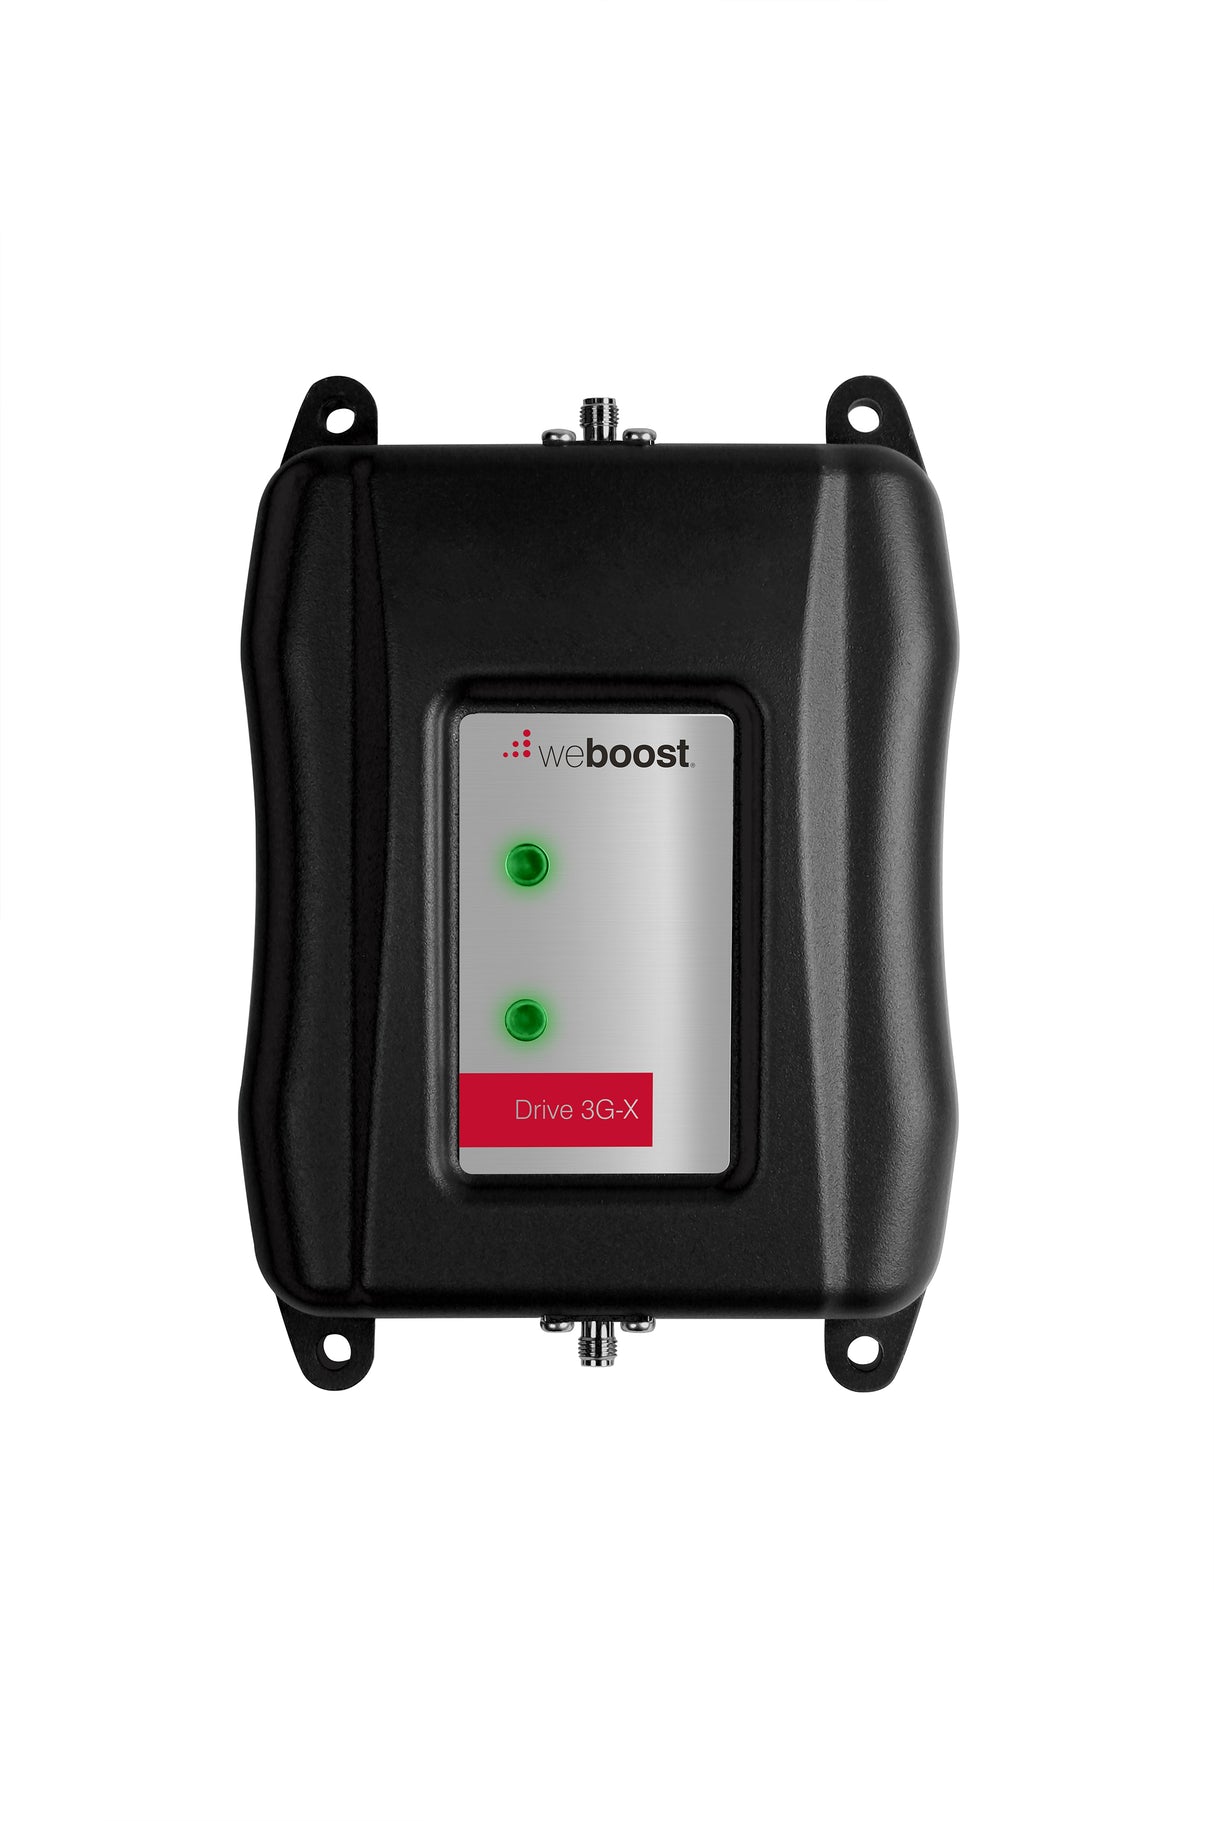 weBoost 470111 Drive 3G-X Extreme Signal Booster Kit - Amplifier